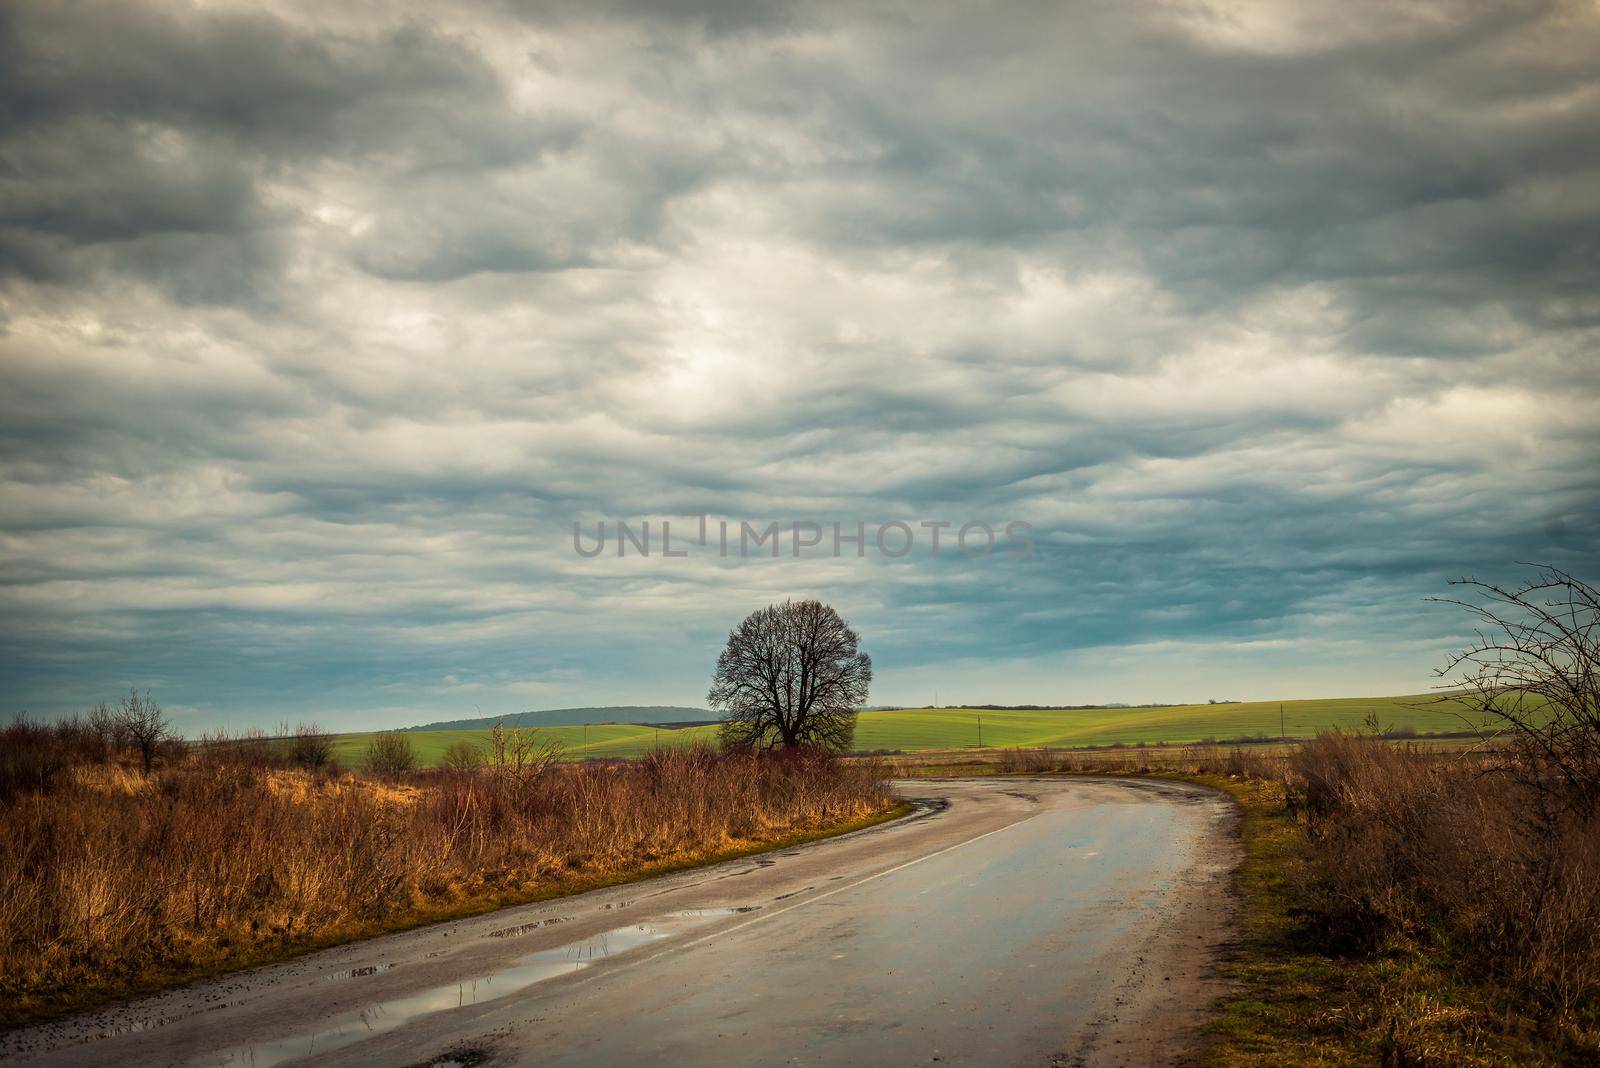 wonderful landscape with lonely tree by country road in the midst of fields